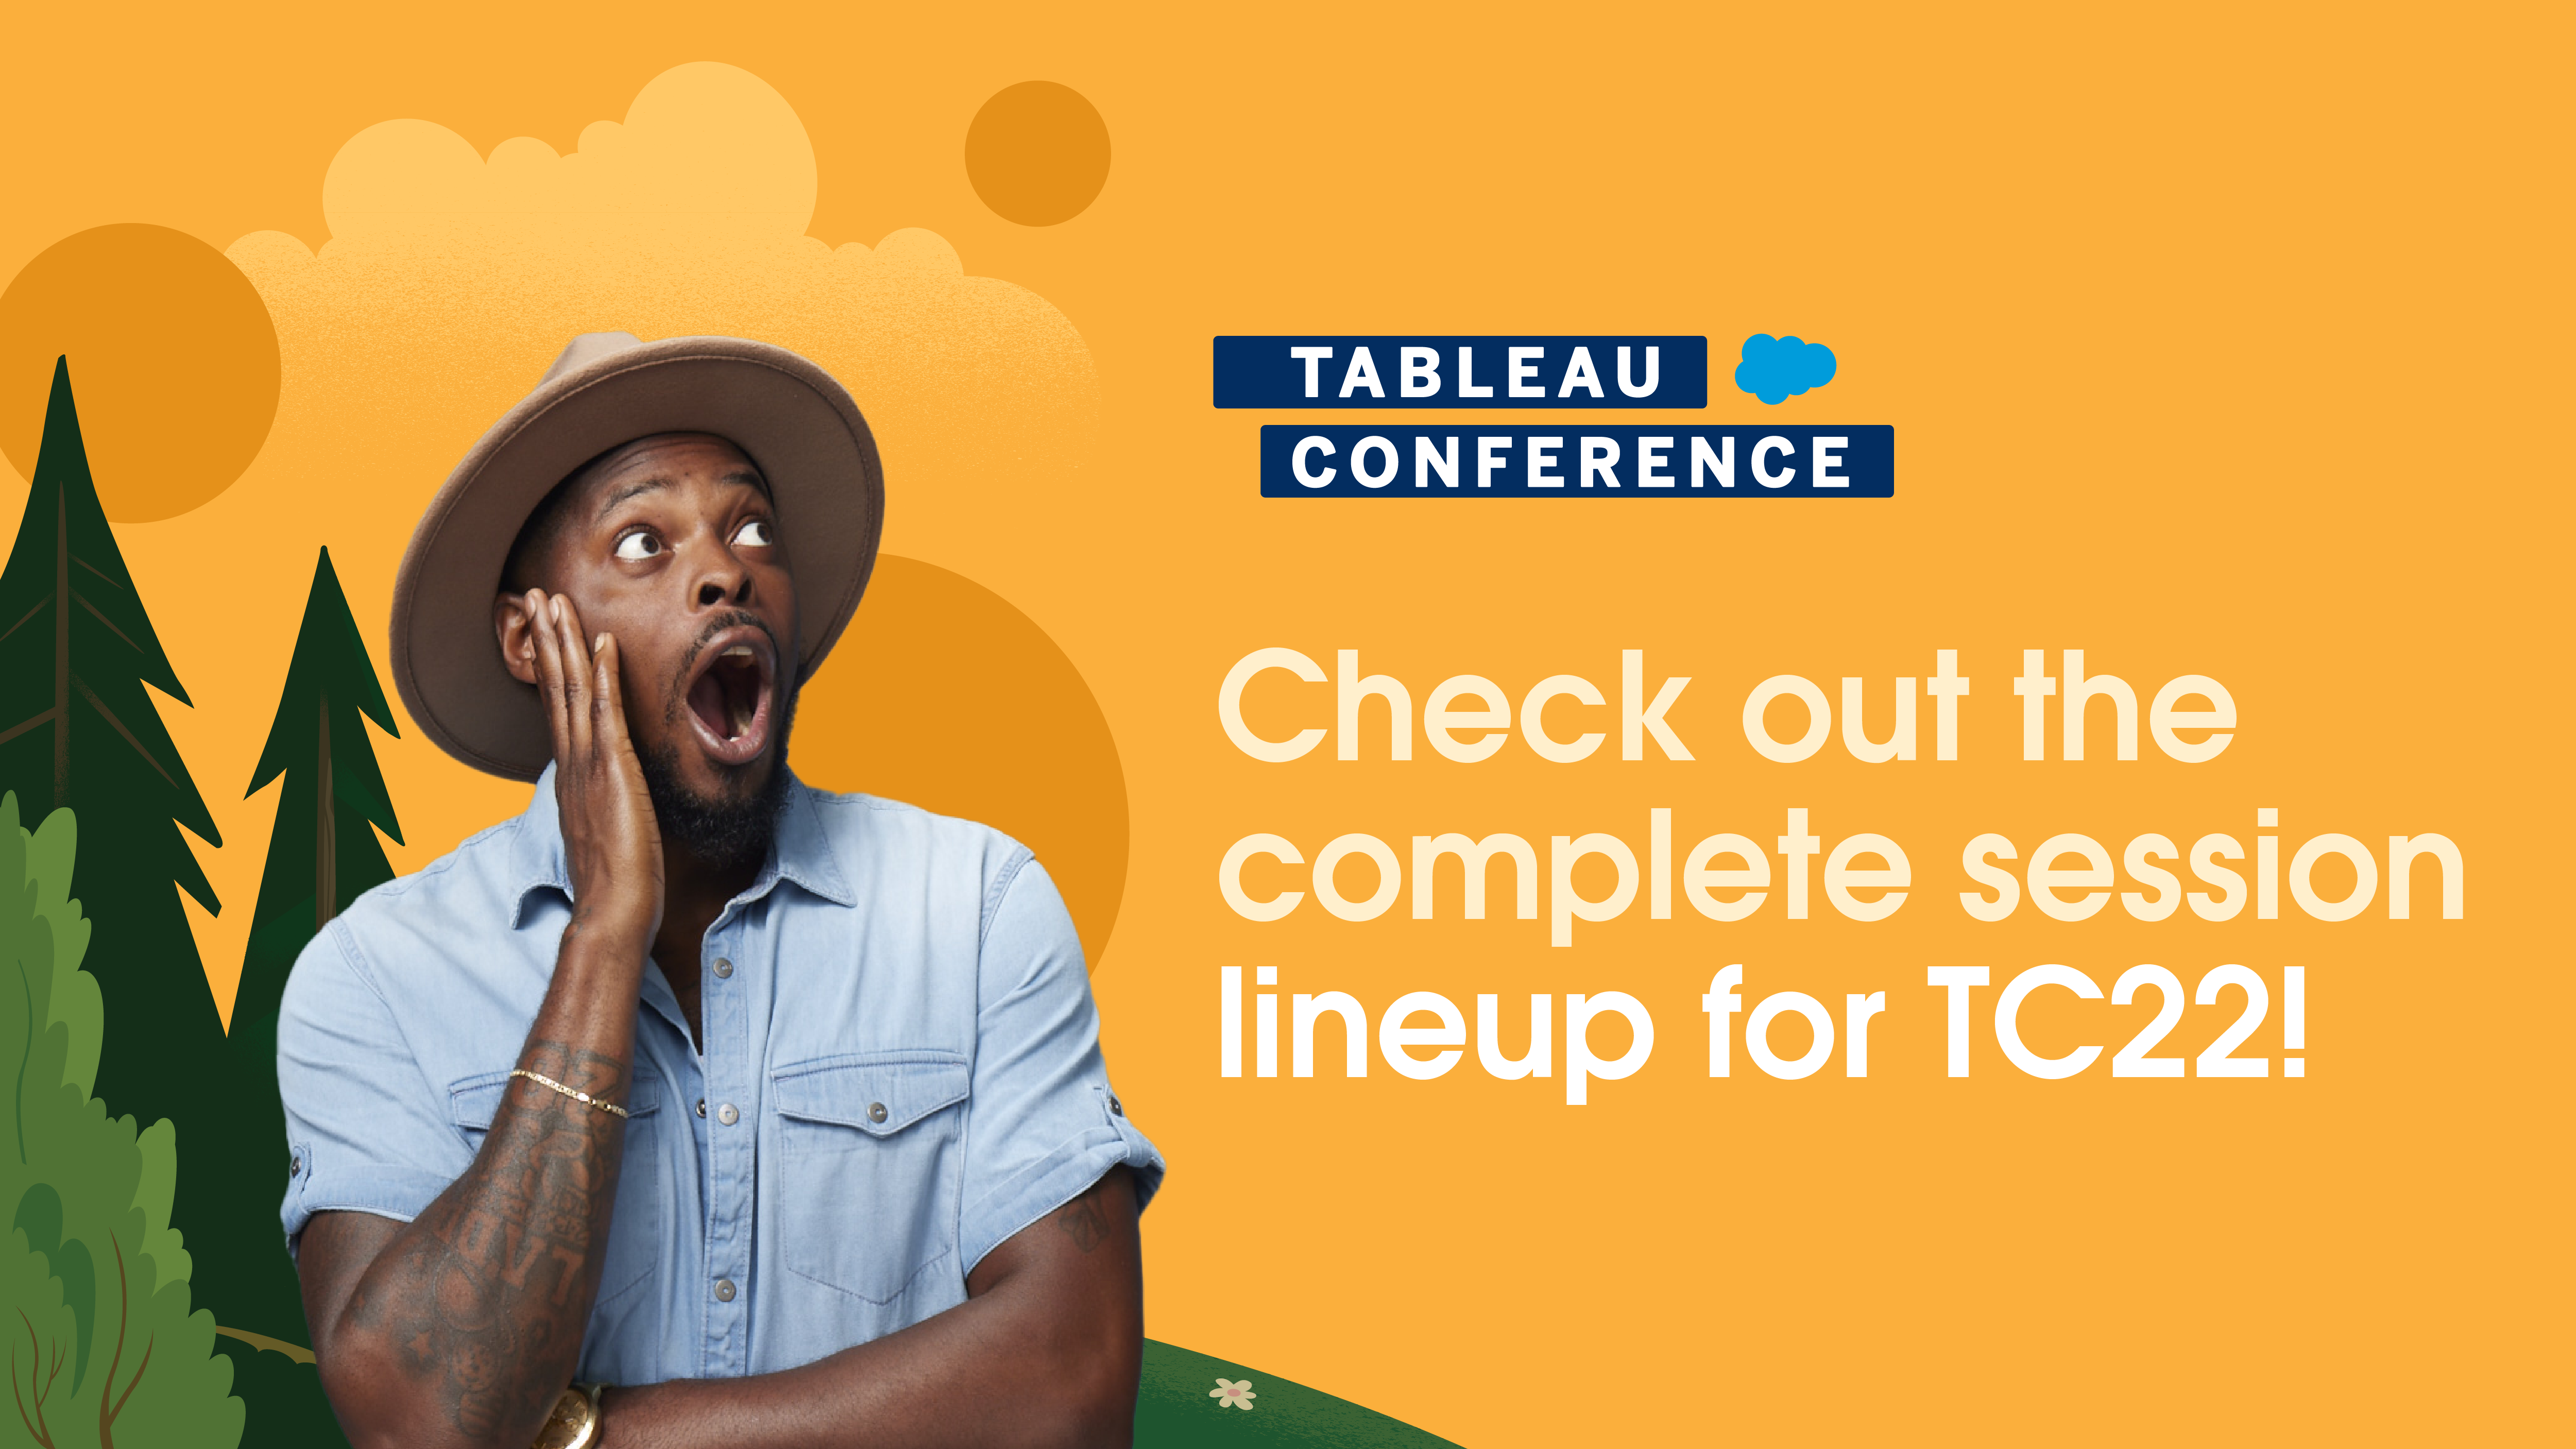 Person wearing hat, looking excited: Check out the complete session lineup for TC22!